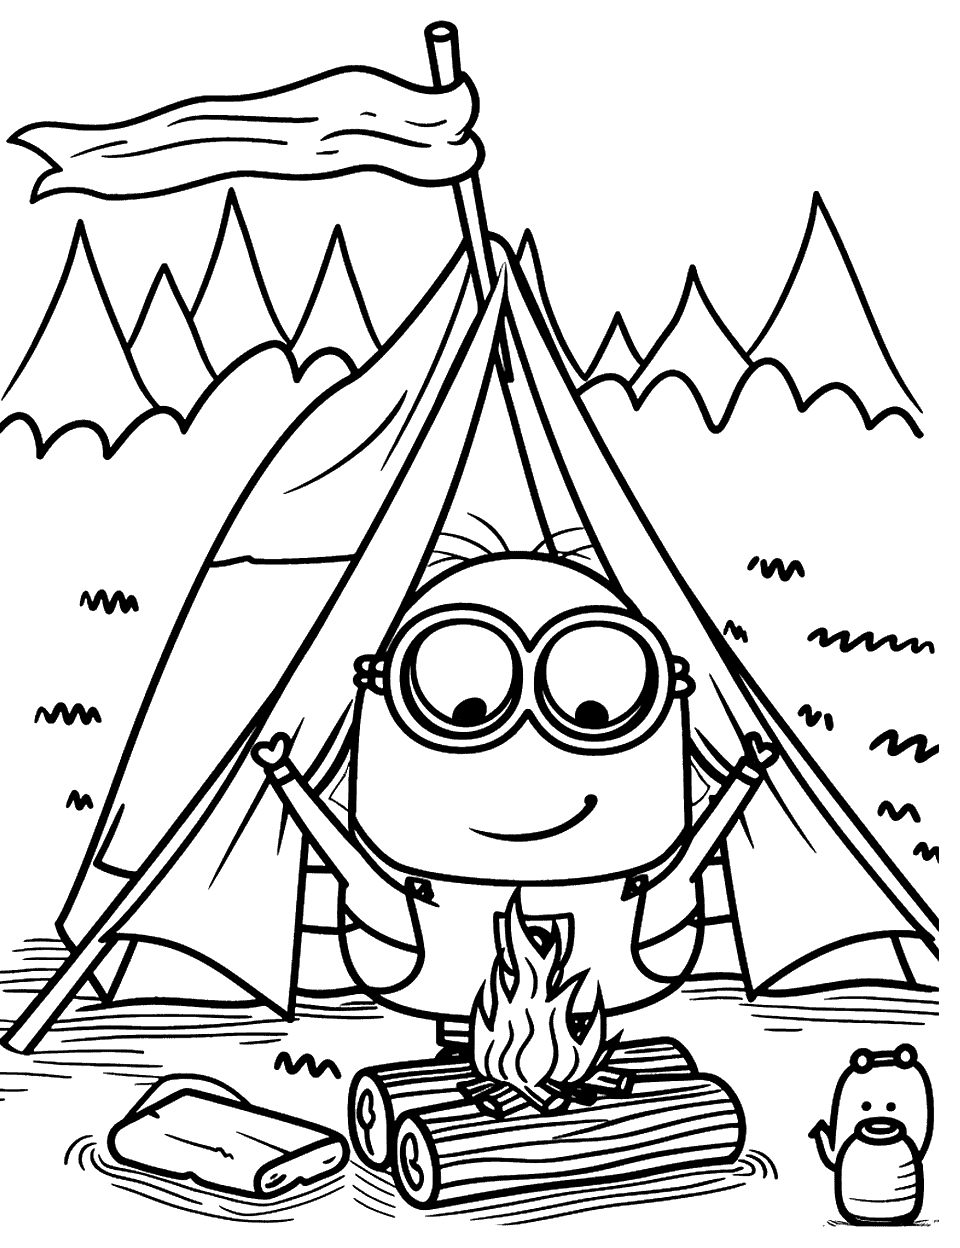 Minion's Camping Fun Coloring Page - A minion sitting outside a tent, trying to set up a campfire.